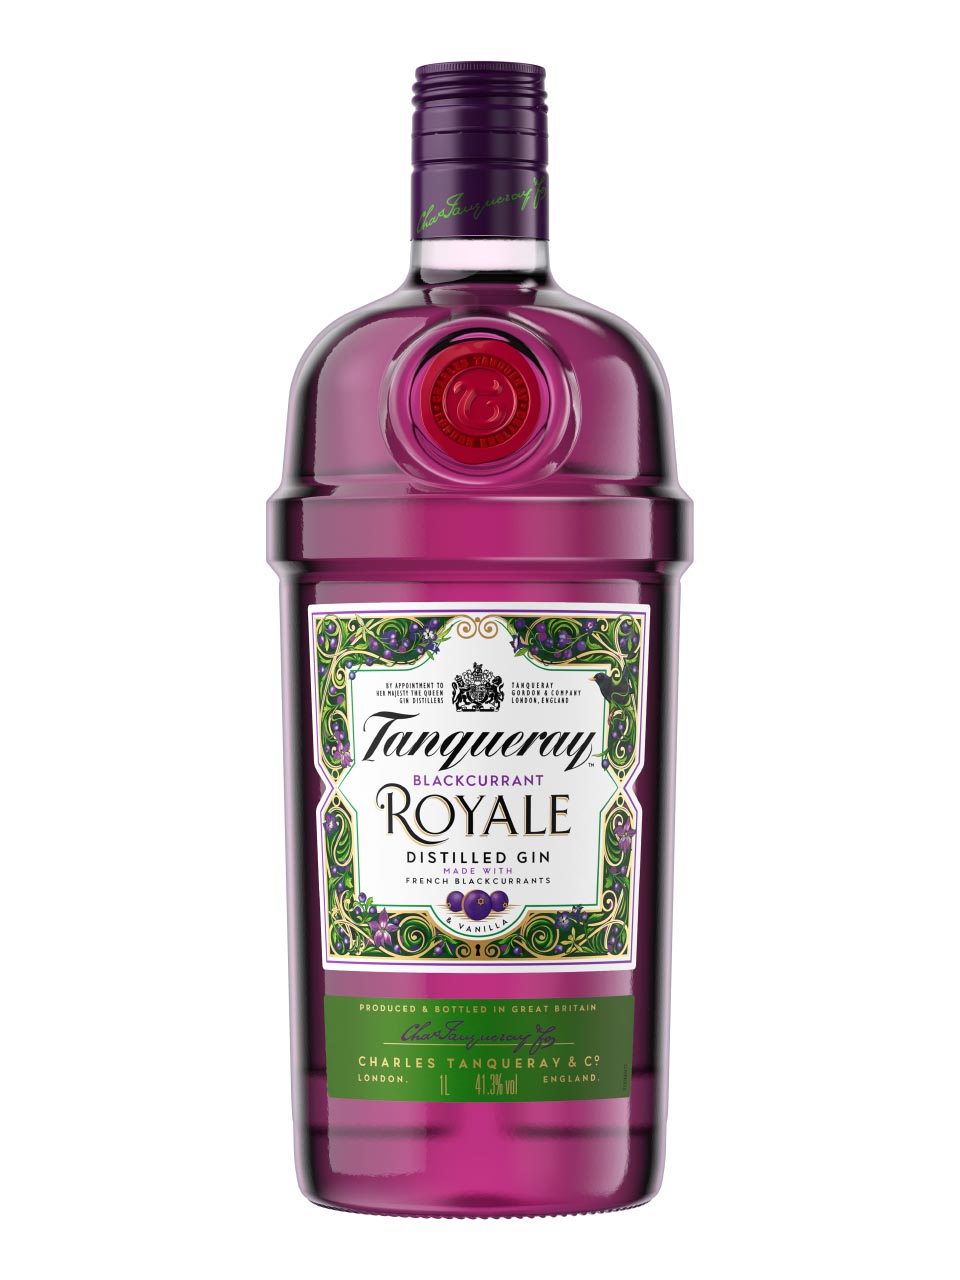 Tanqueray Blackcurrant Royale 41.3% 1L null - onesize - 1